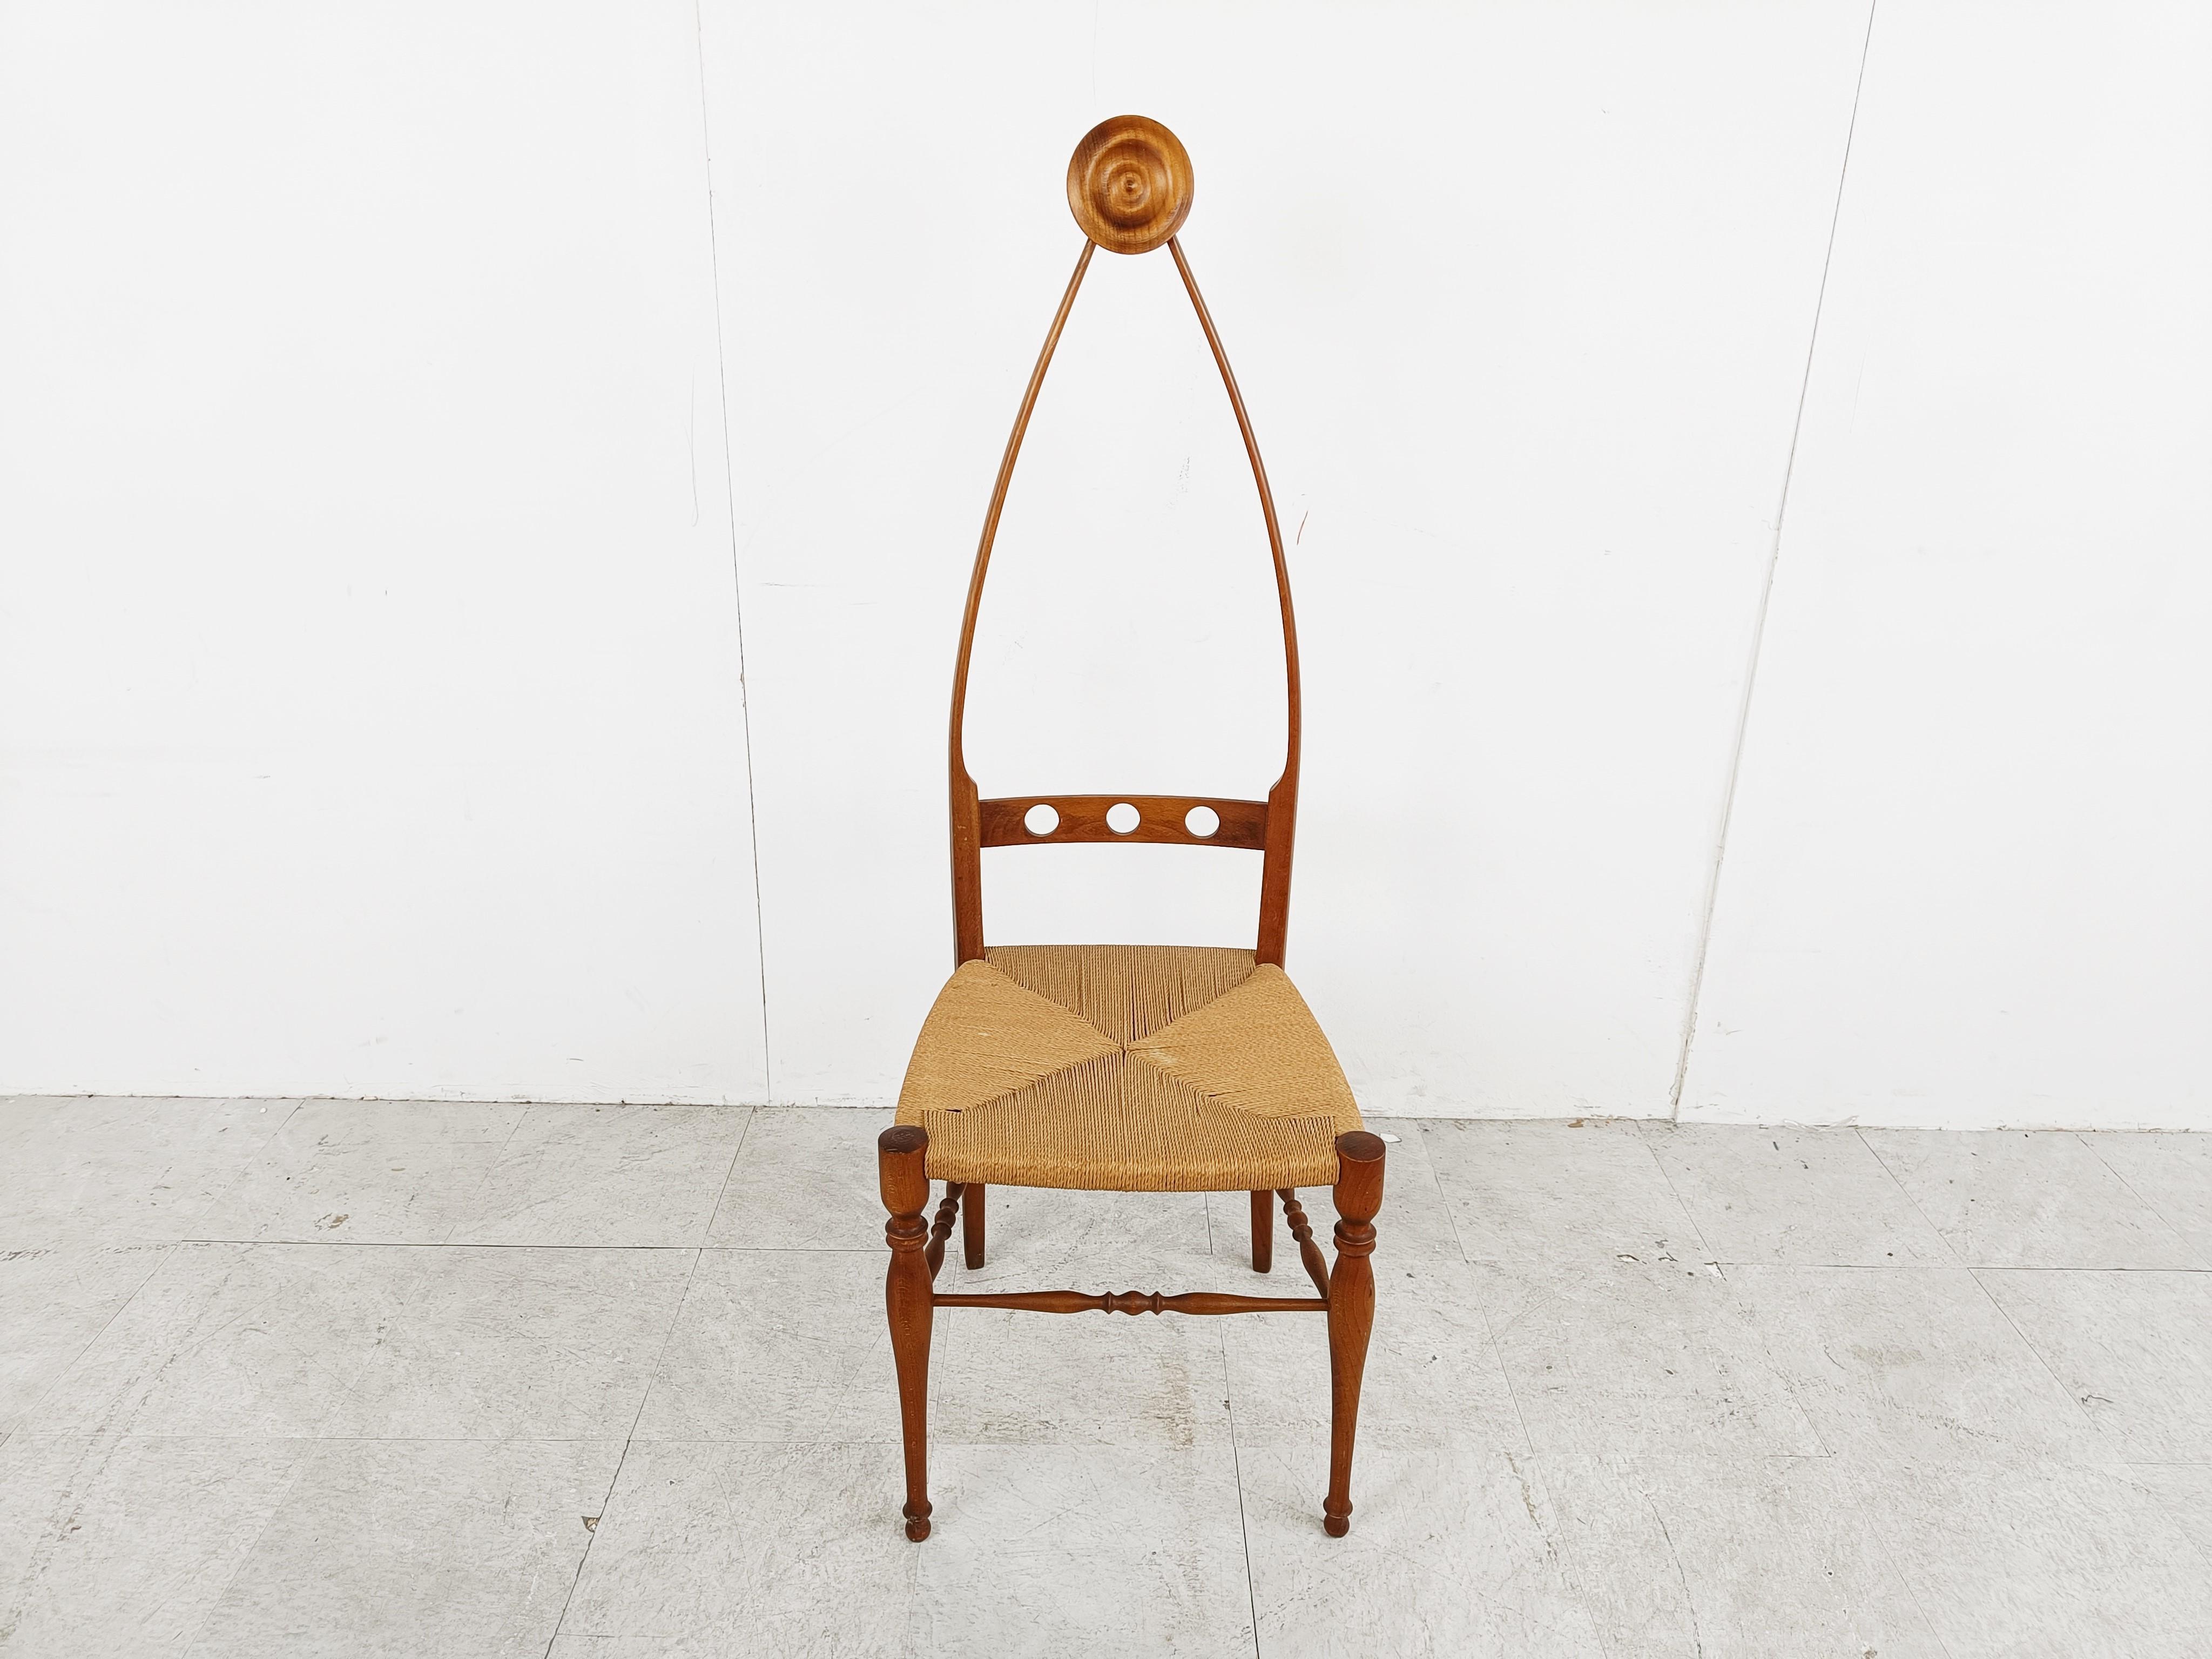 Beautifully crafted sculptural high back chair by Pozzi & Varga.

The very fine and elegant frame is made from walnut and the chair is made of papercord.

Notice the gorgeous curves and detailing on the frame. 

Very decorative chair. 

Very good